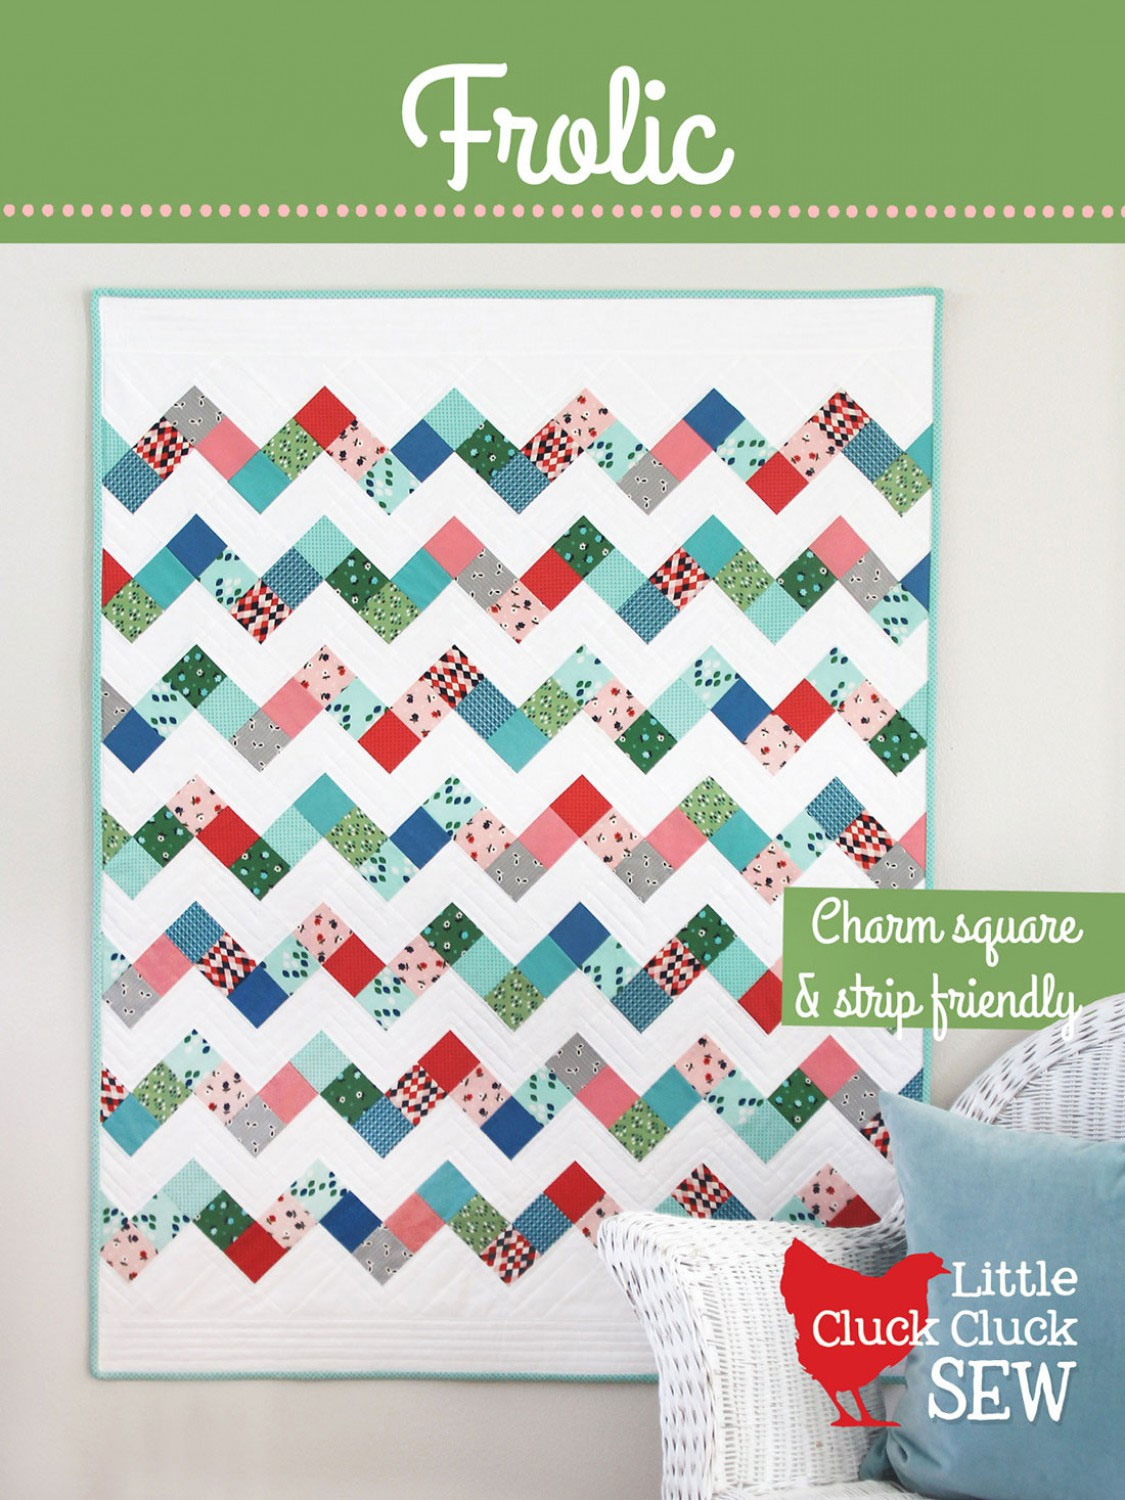 Frolic-quilt-sewing-pattern-Cluck-Cluck-Sew-front